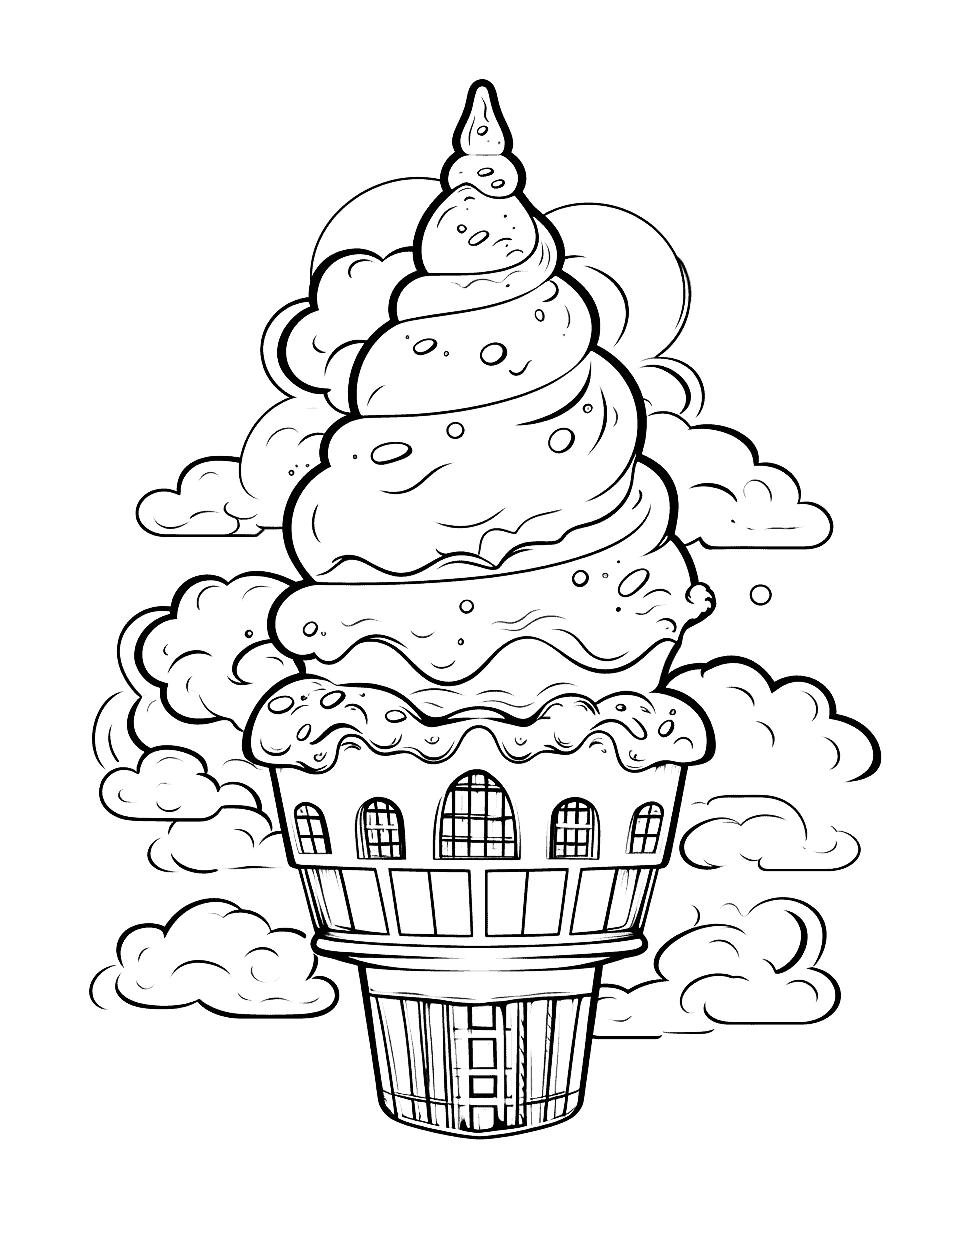 Ice Cream Castle in the Sky Coloring Page - A majestic castle made of ice cream scoops floating on clouds.